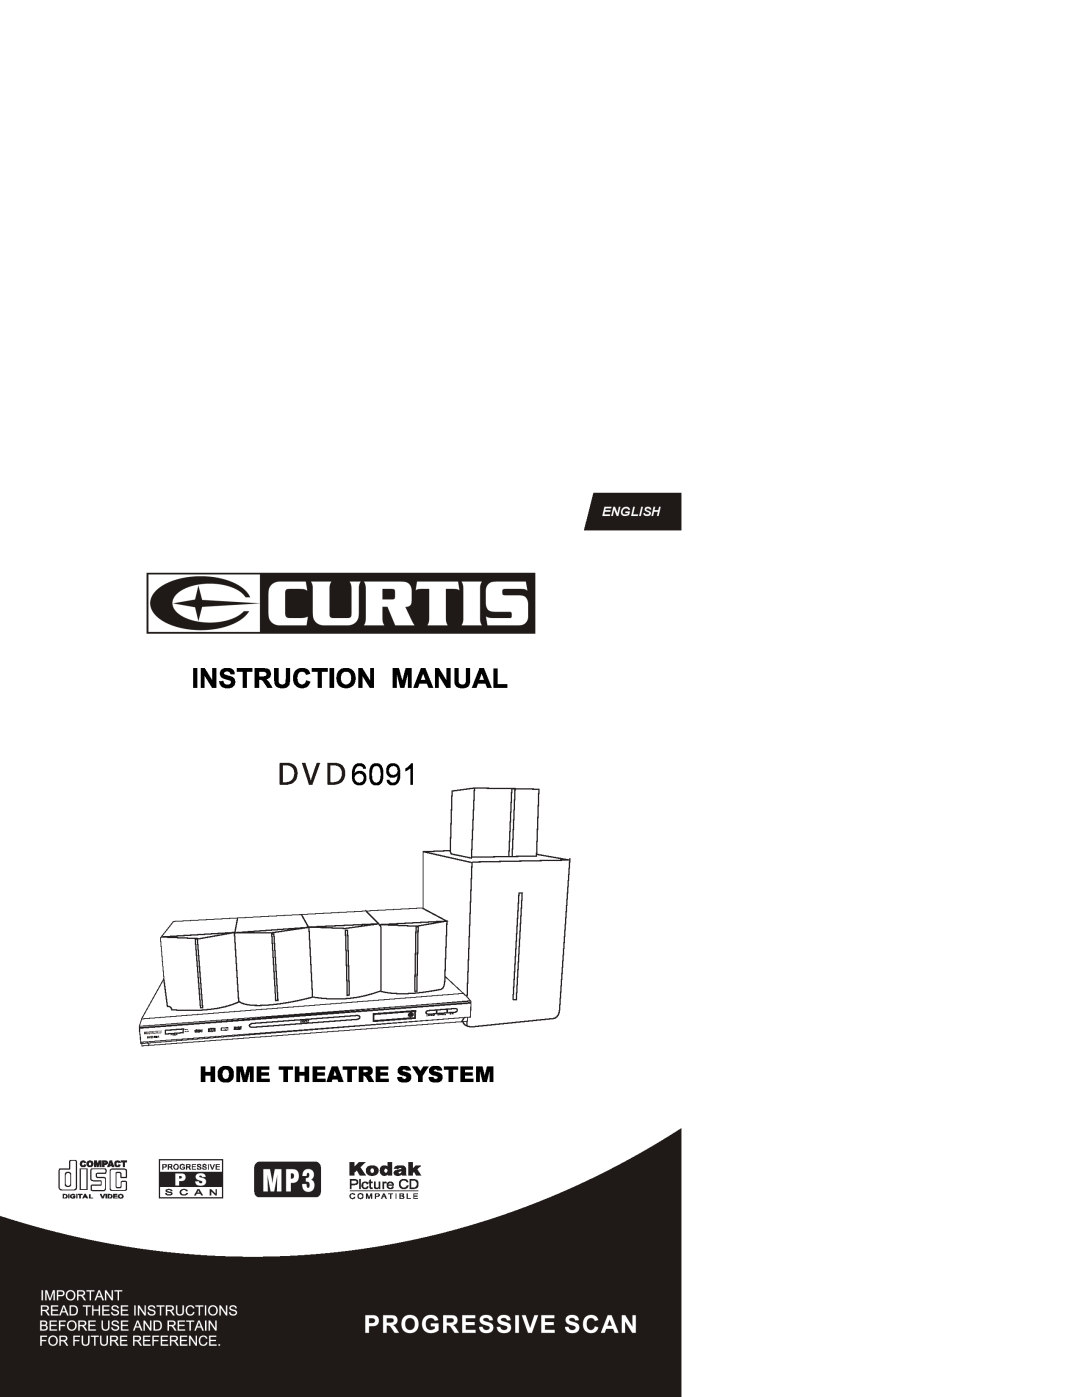 Curtis DVD6091 manual Home Theatre System, English 